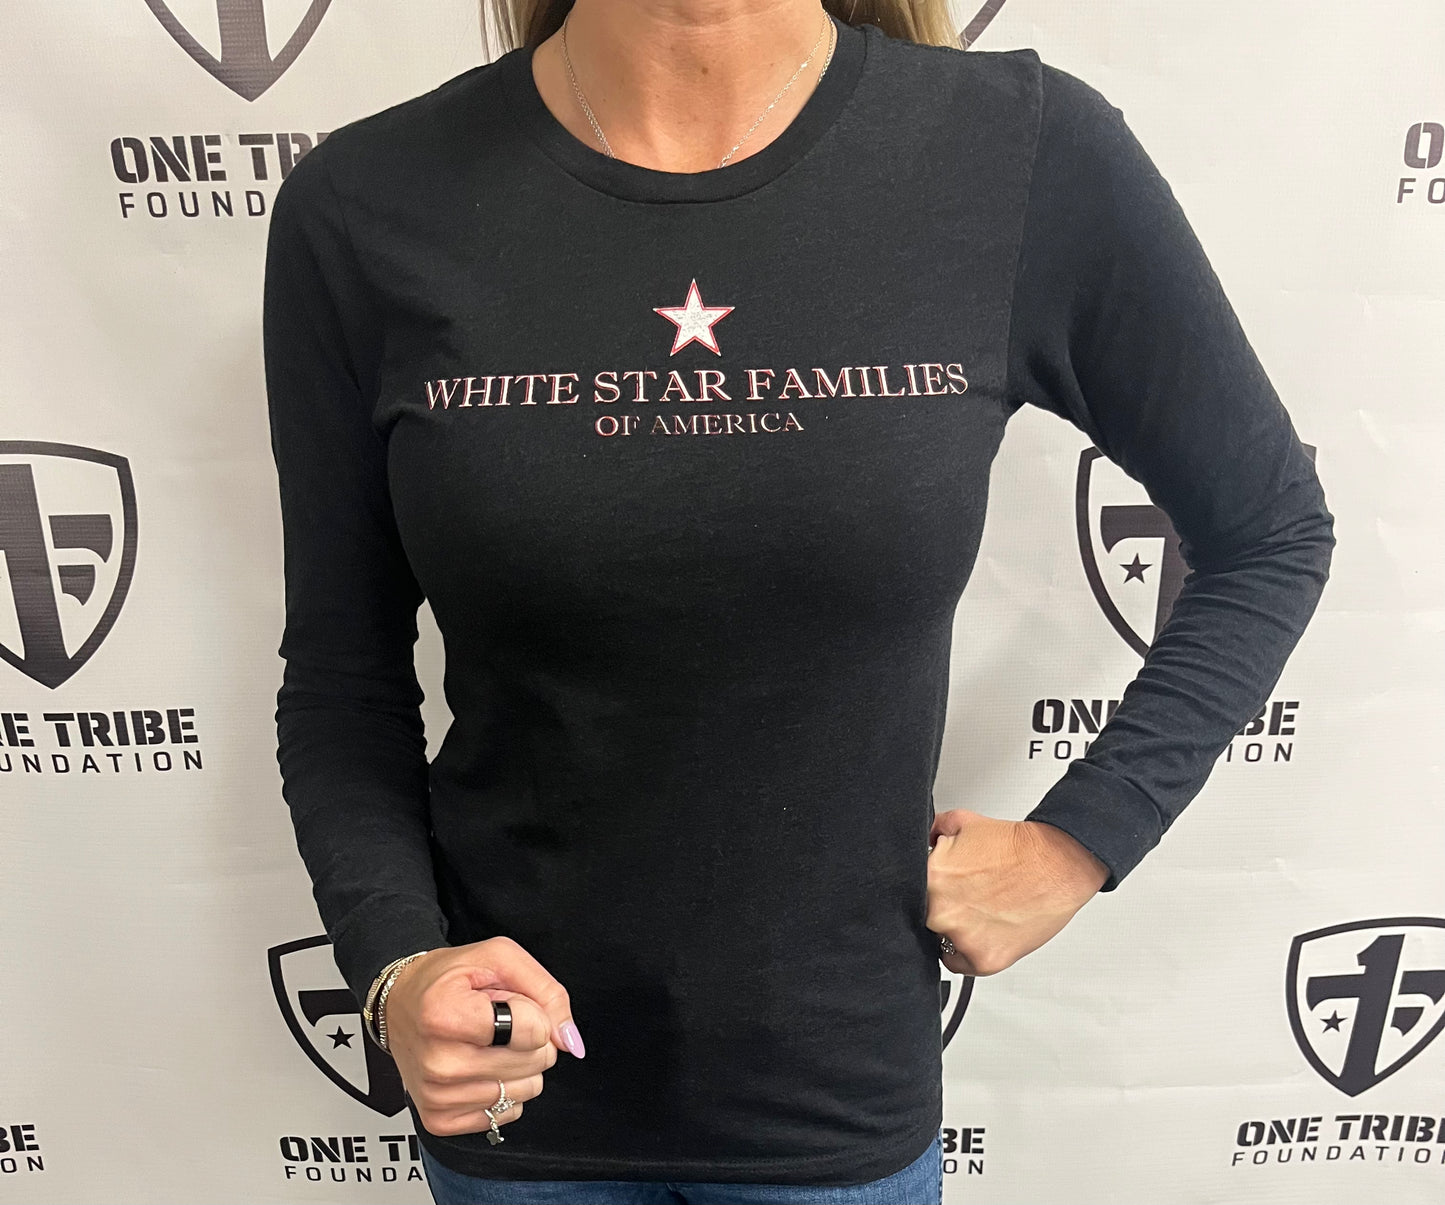 White Star families supports families affected by the act of suicide. One Tribe Foundation